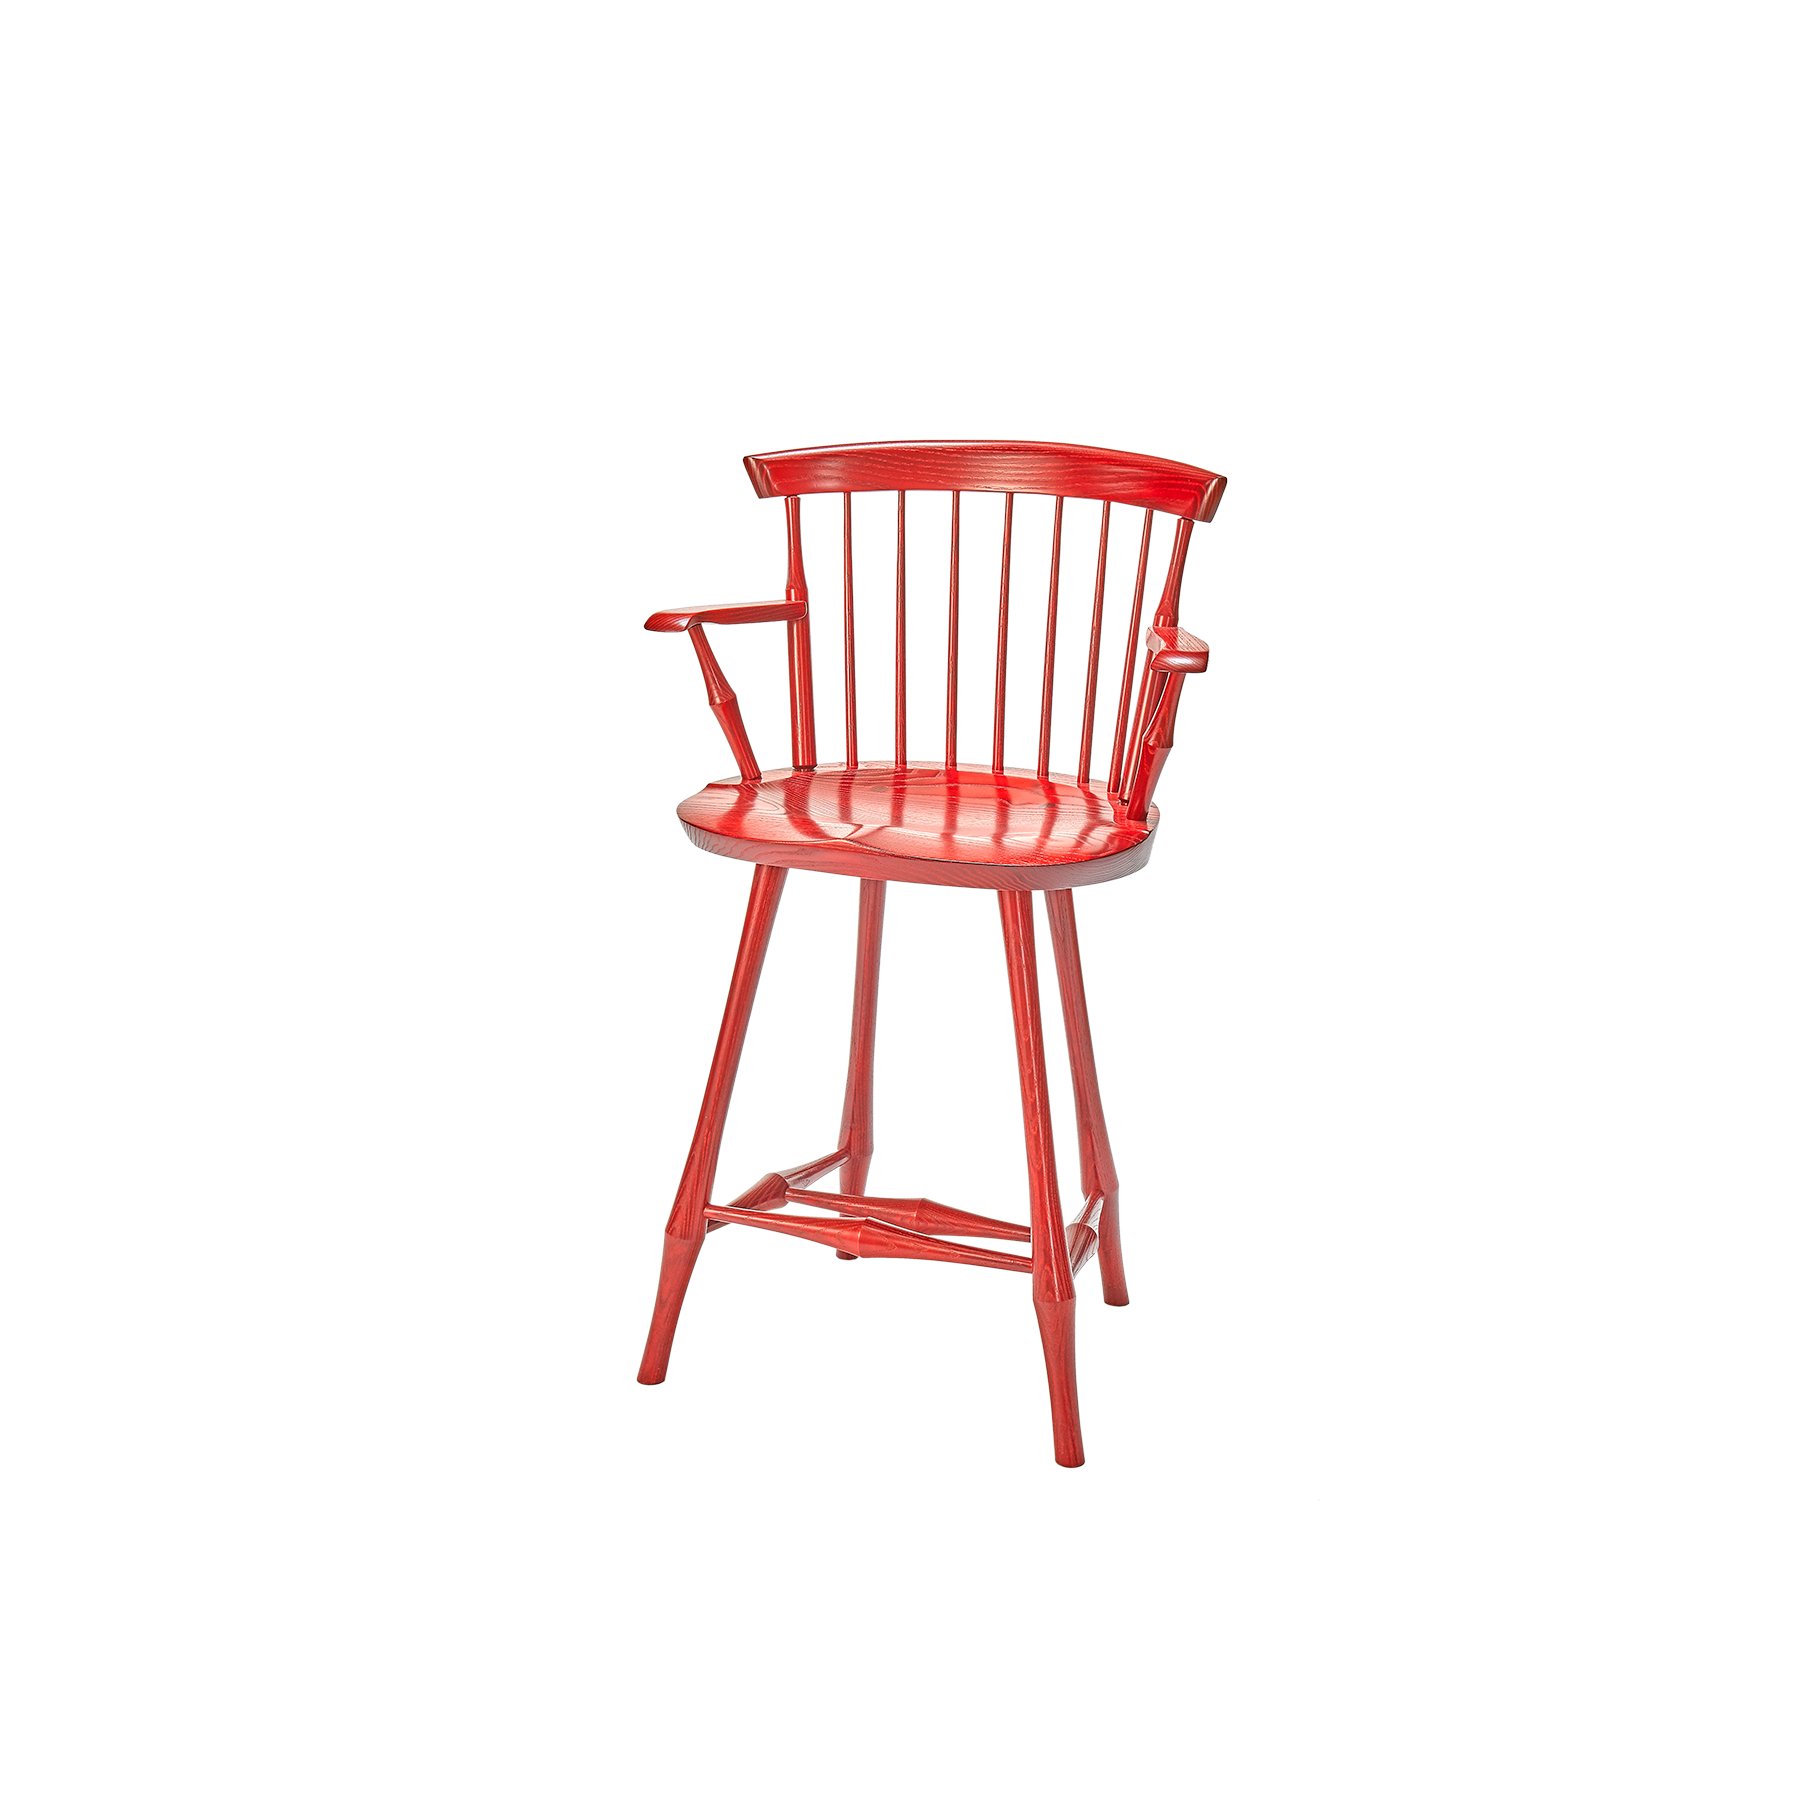 WIDE WAYLAND FAN-BACK STOOL WITH ARMS 24" - $1,596